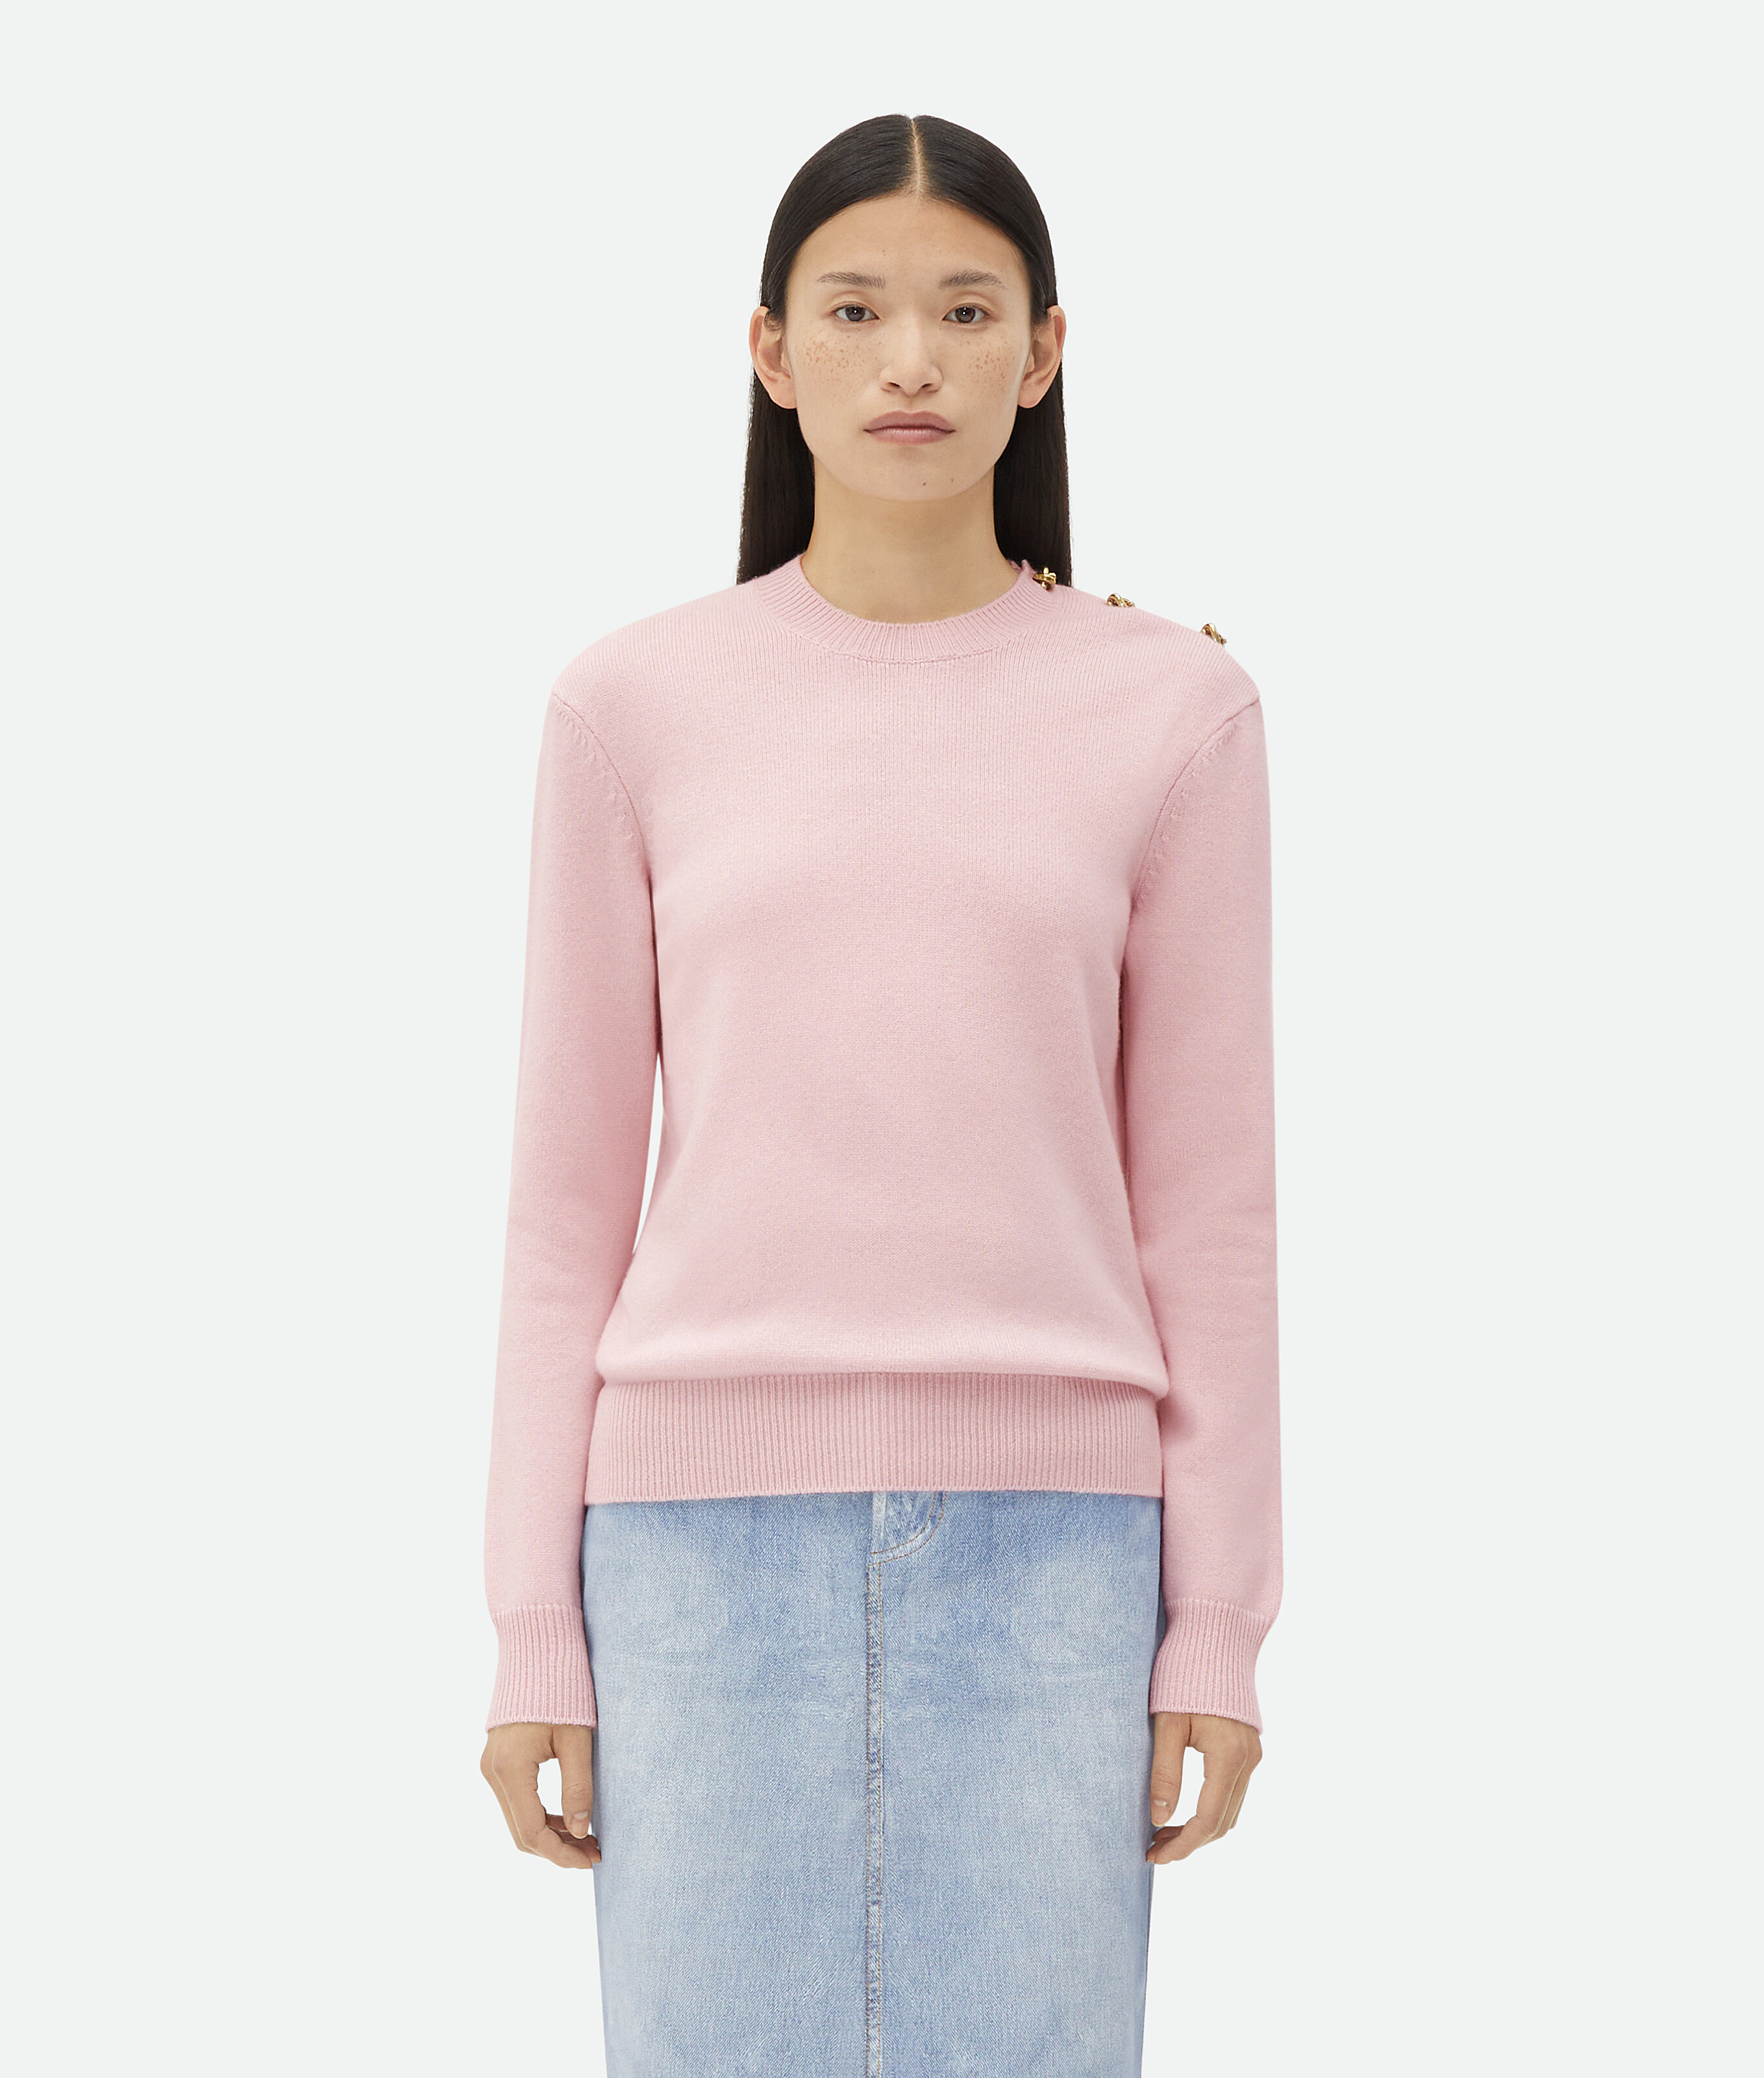 Bottega Veneta Cashmere Sweater With Knot Buttons In Pink